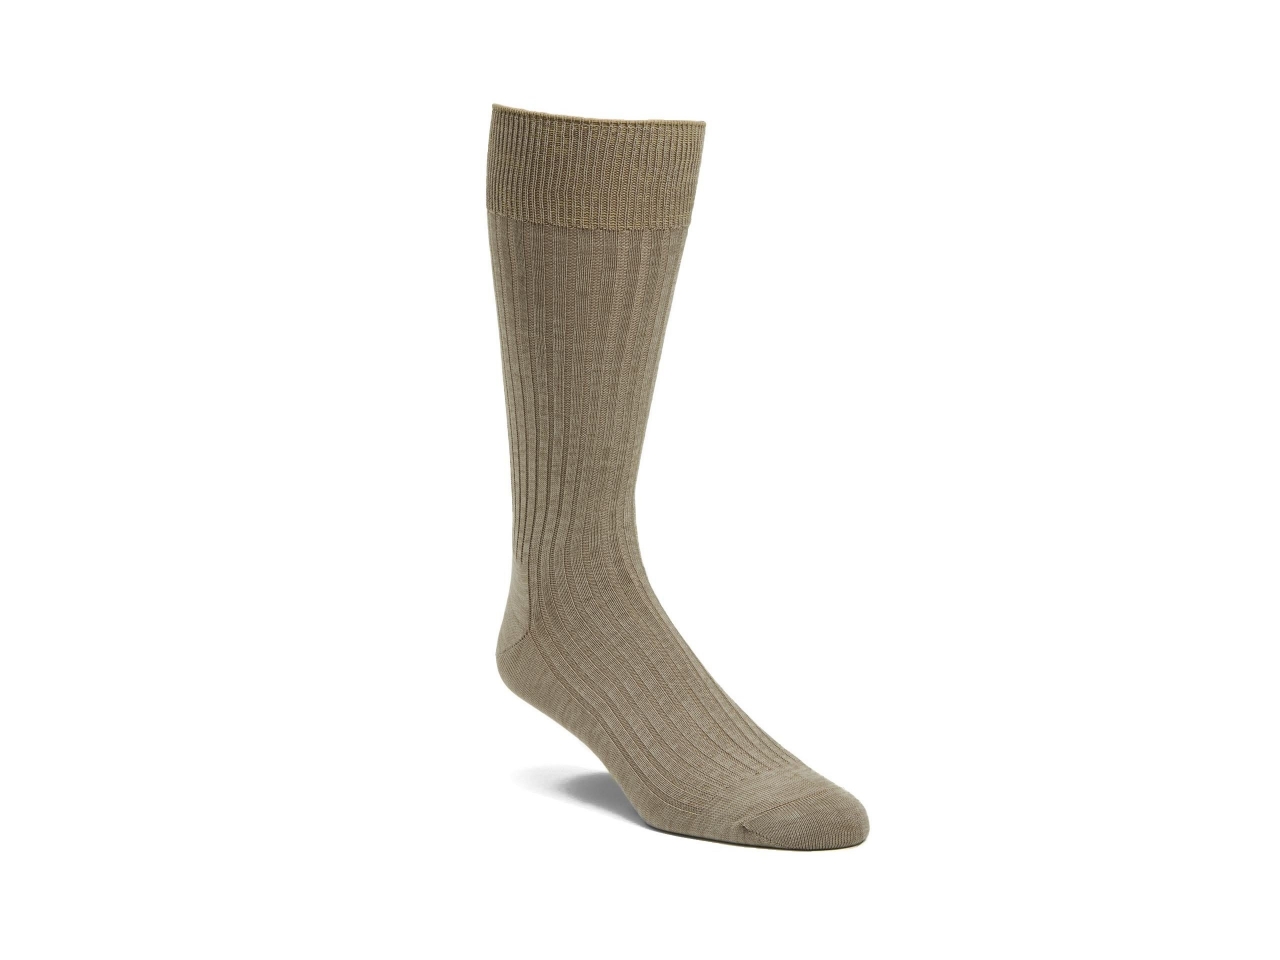 A view of the Casual Dress Sock